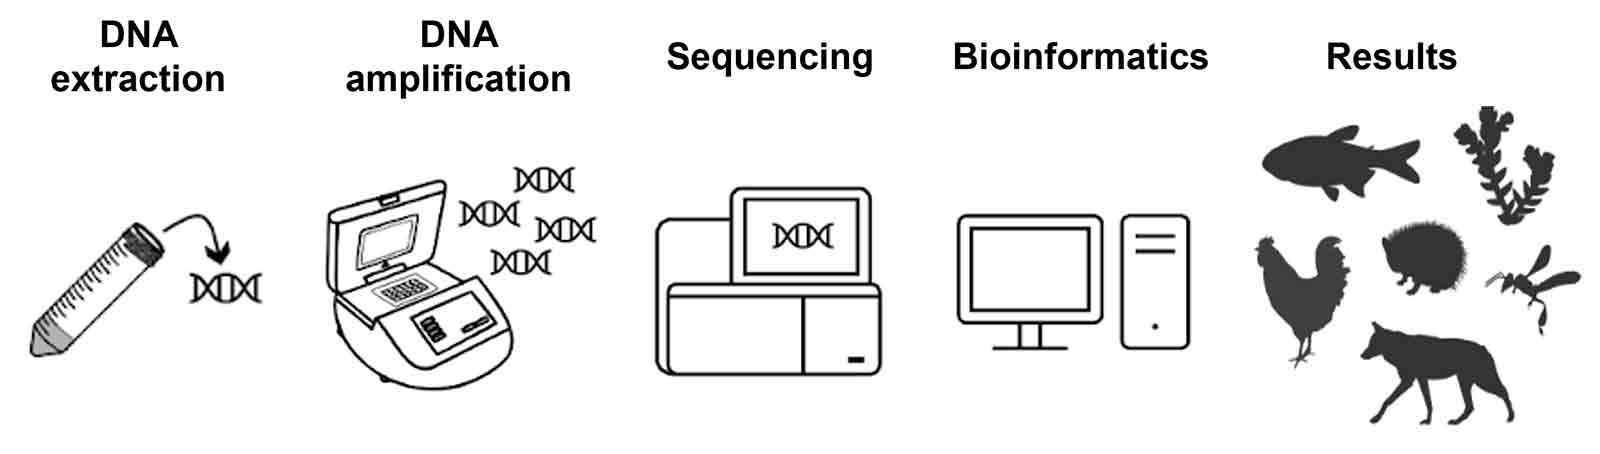 Pictorial representations for DNA extraction, DNA amplification, sequencing, bioinformatics and results.